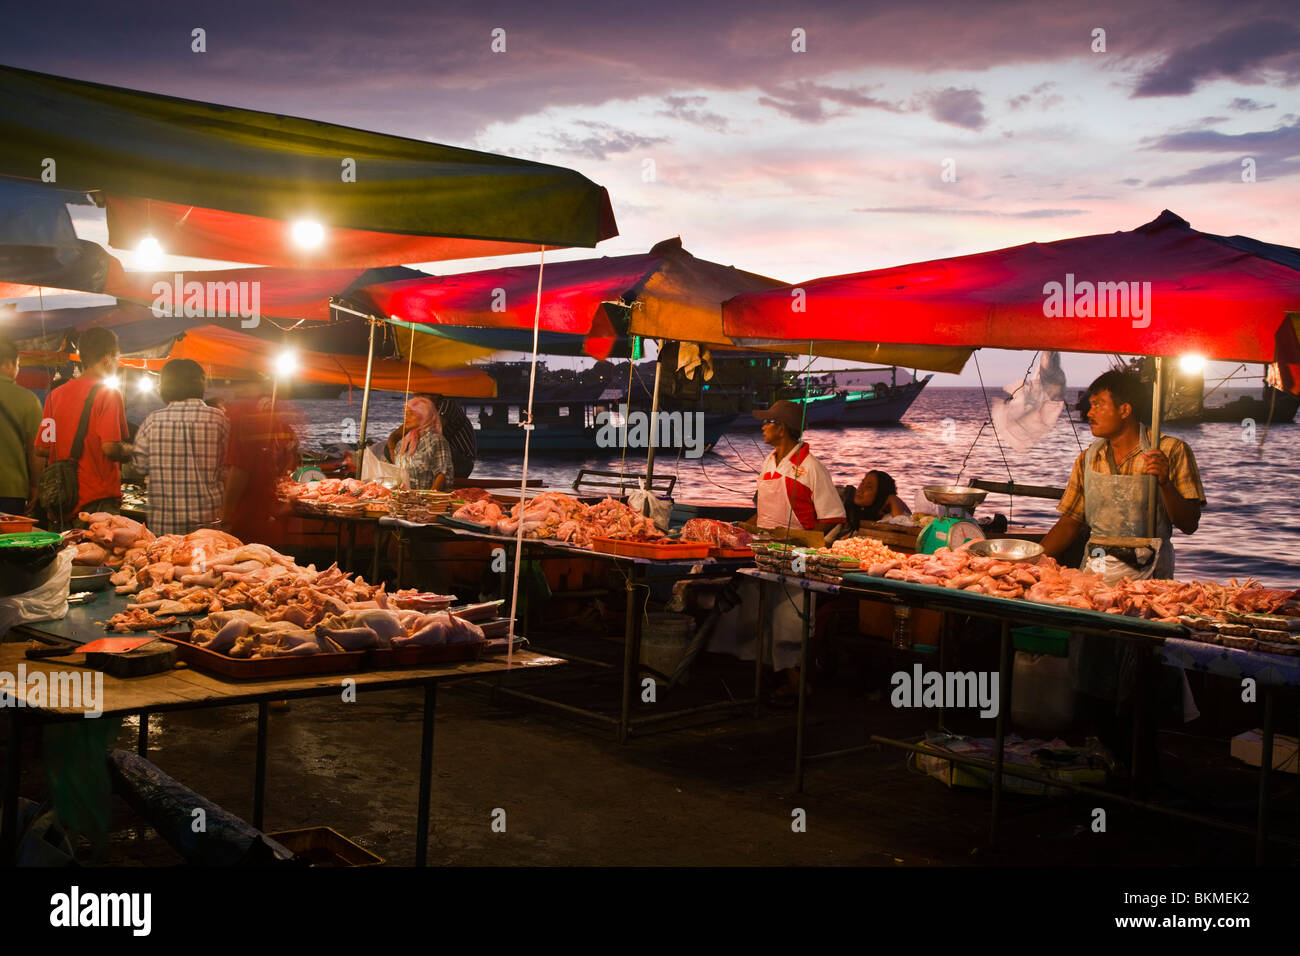 Poultry stalls at the open air Night Market on the waterfront. Kota Kinabalu, Sabah, Borneo, Malaysia. Stock Photo